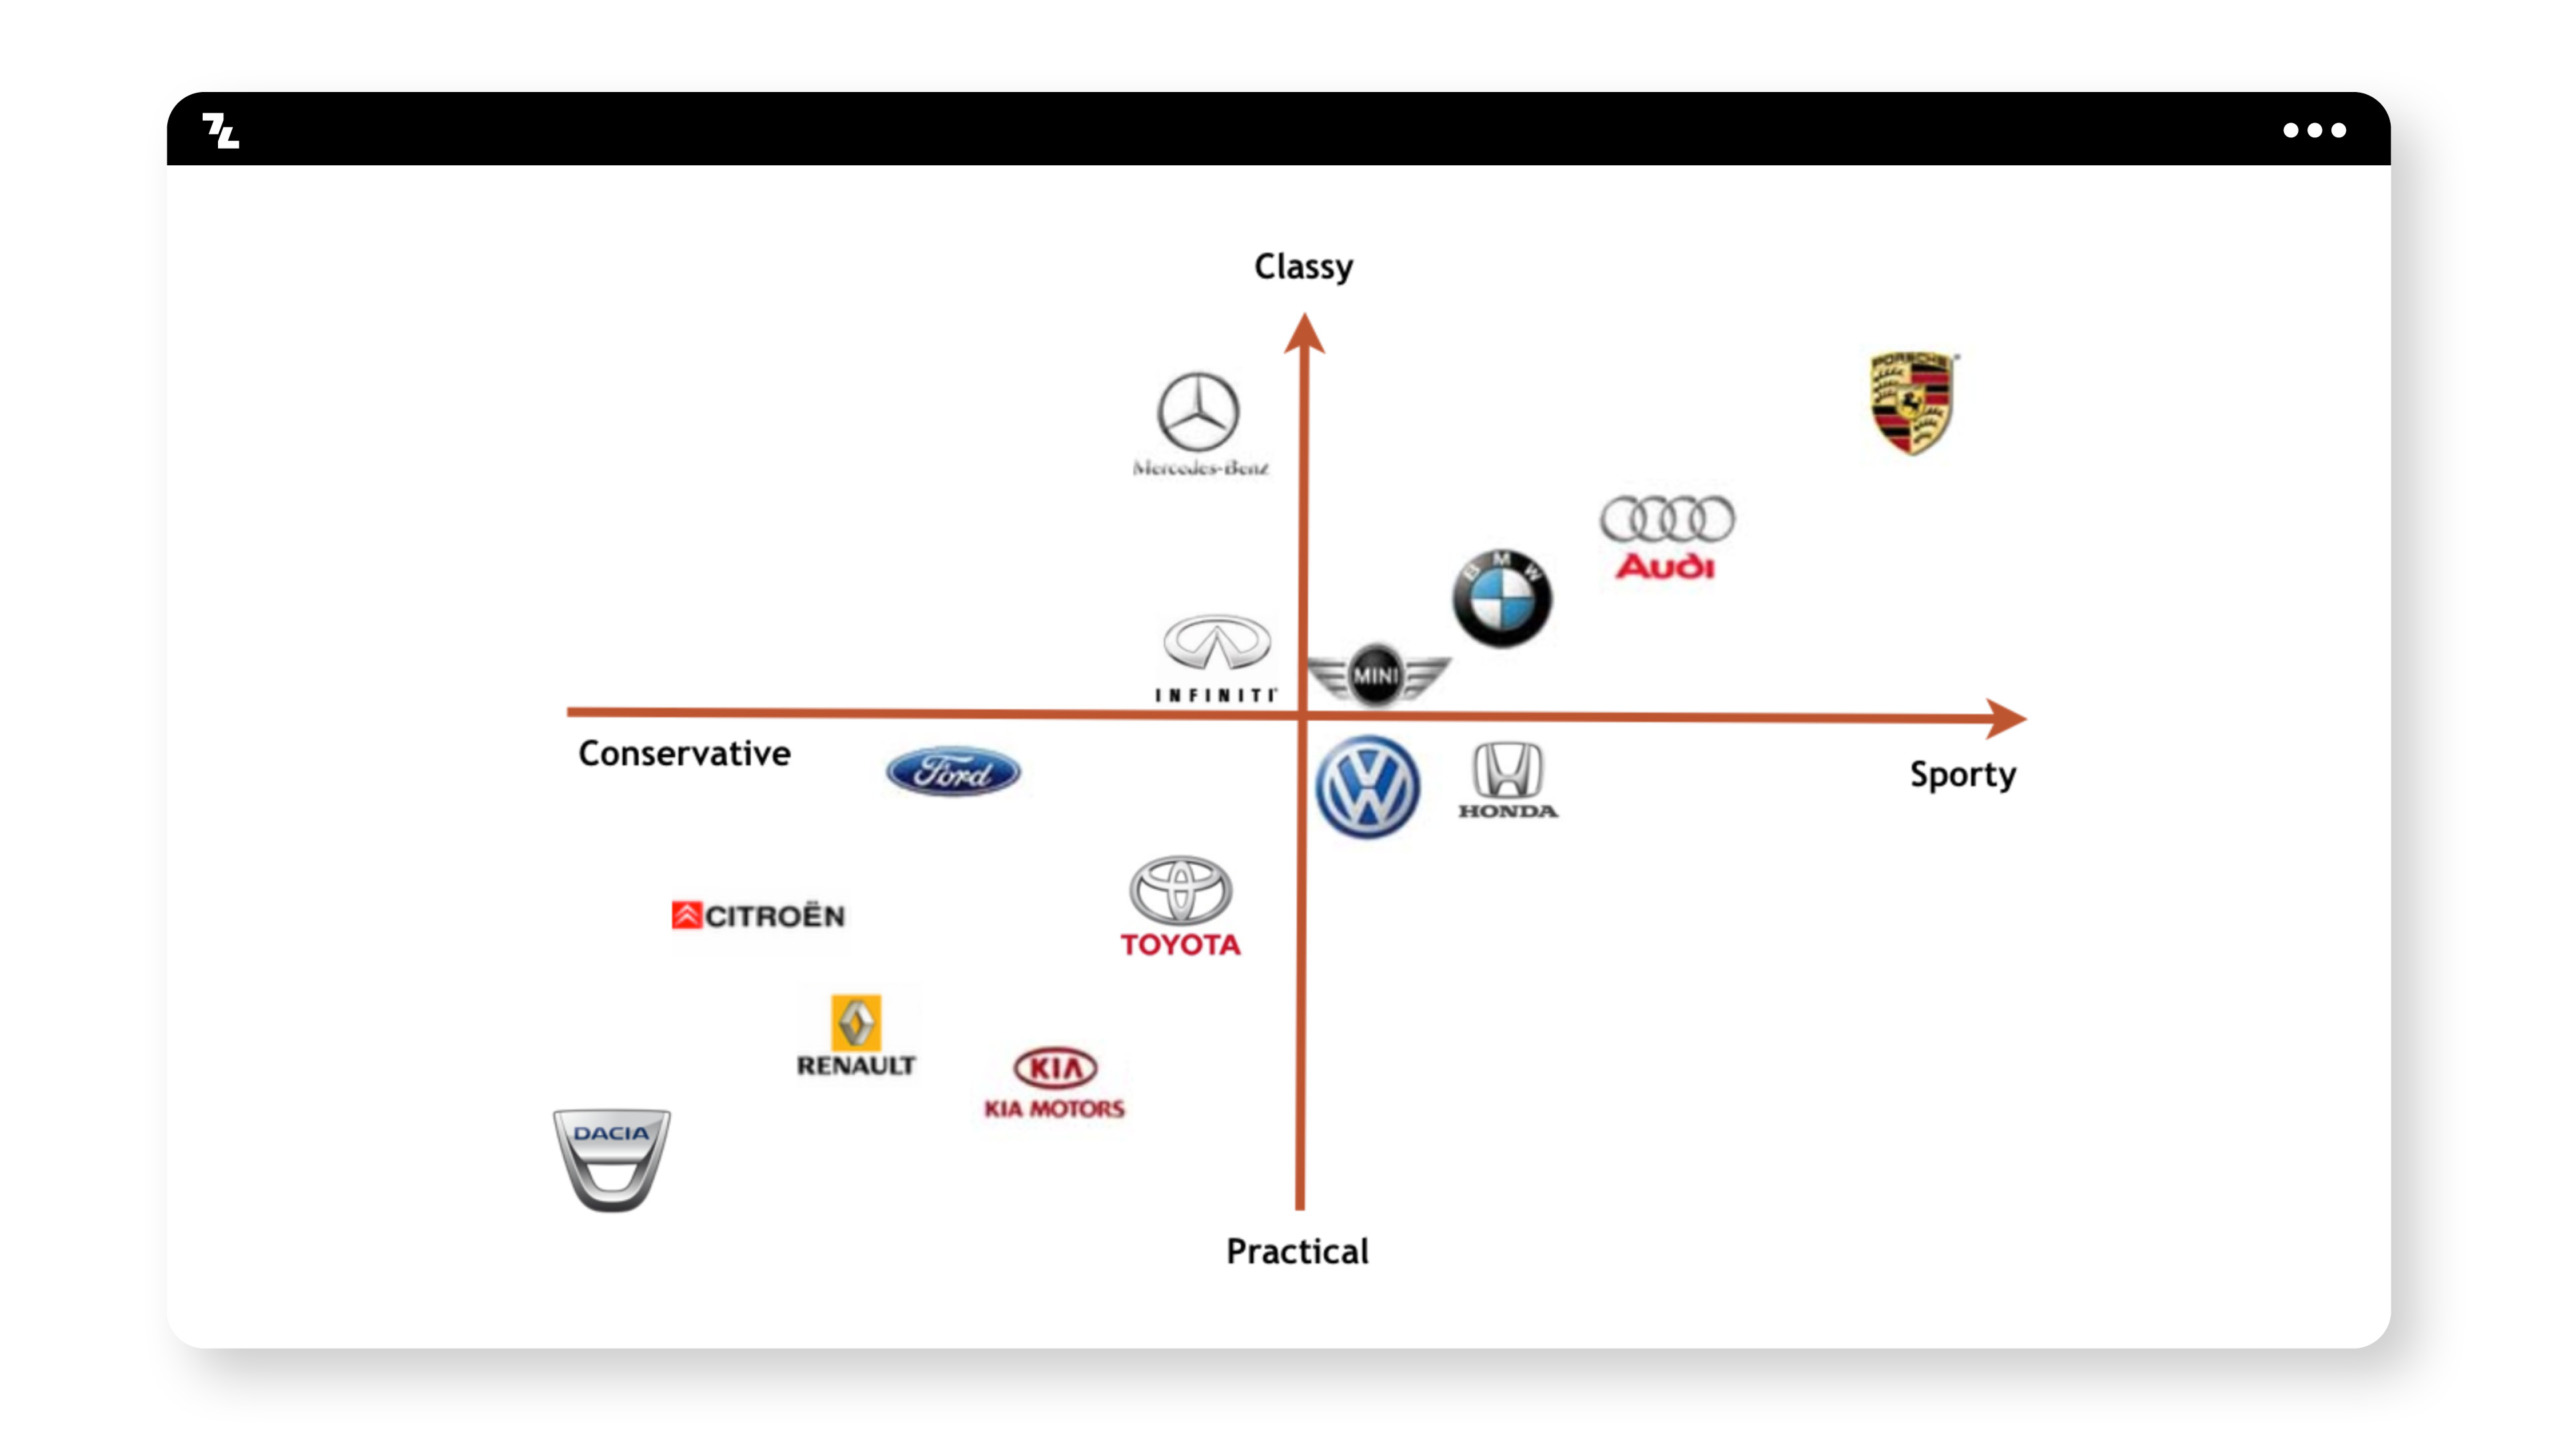 A diagram showing the different types of car brands.